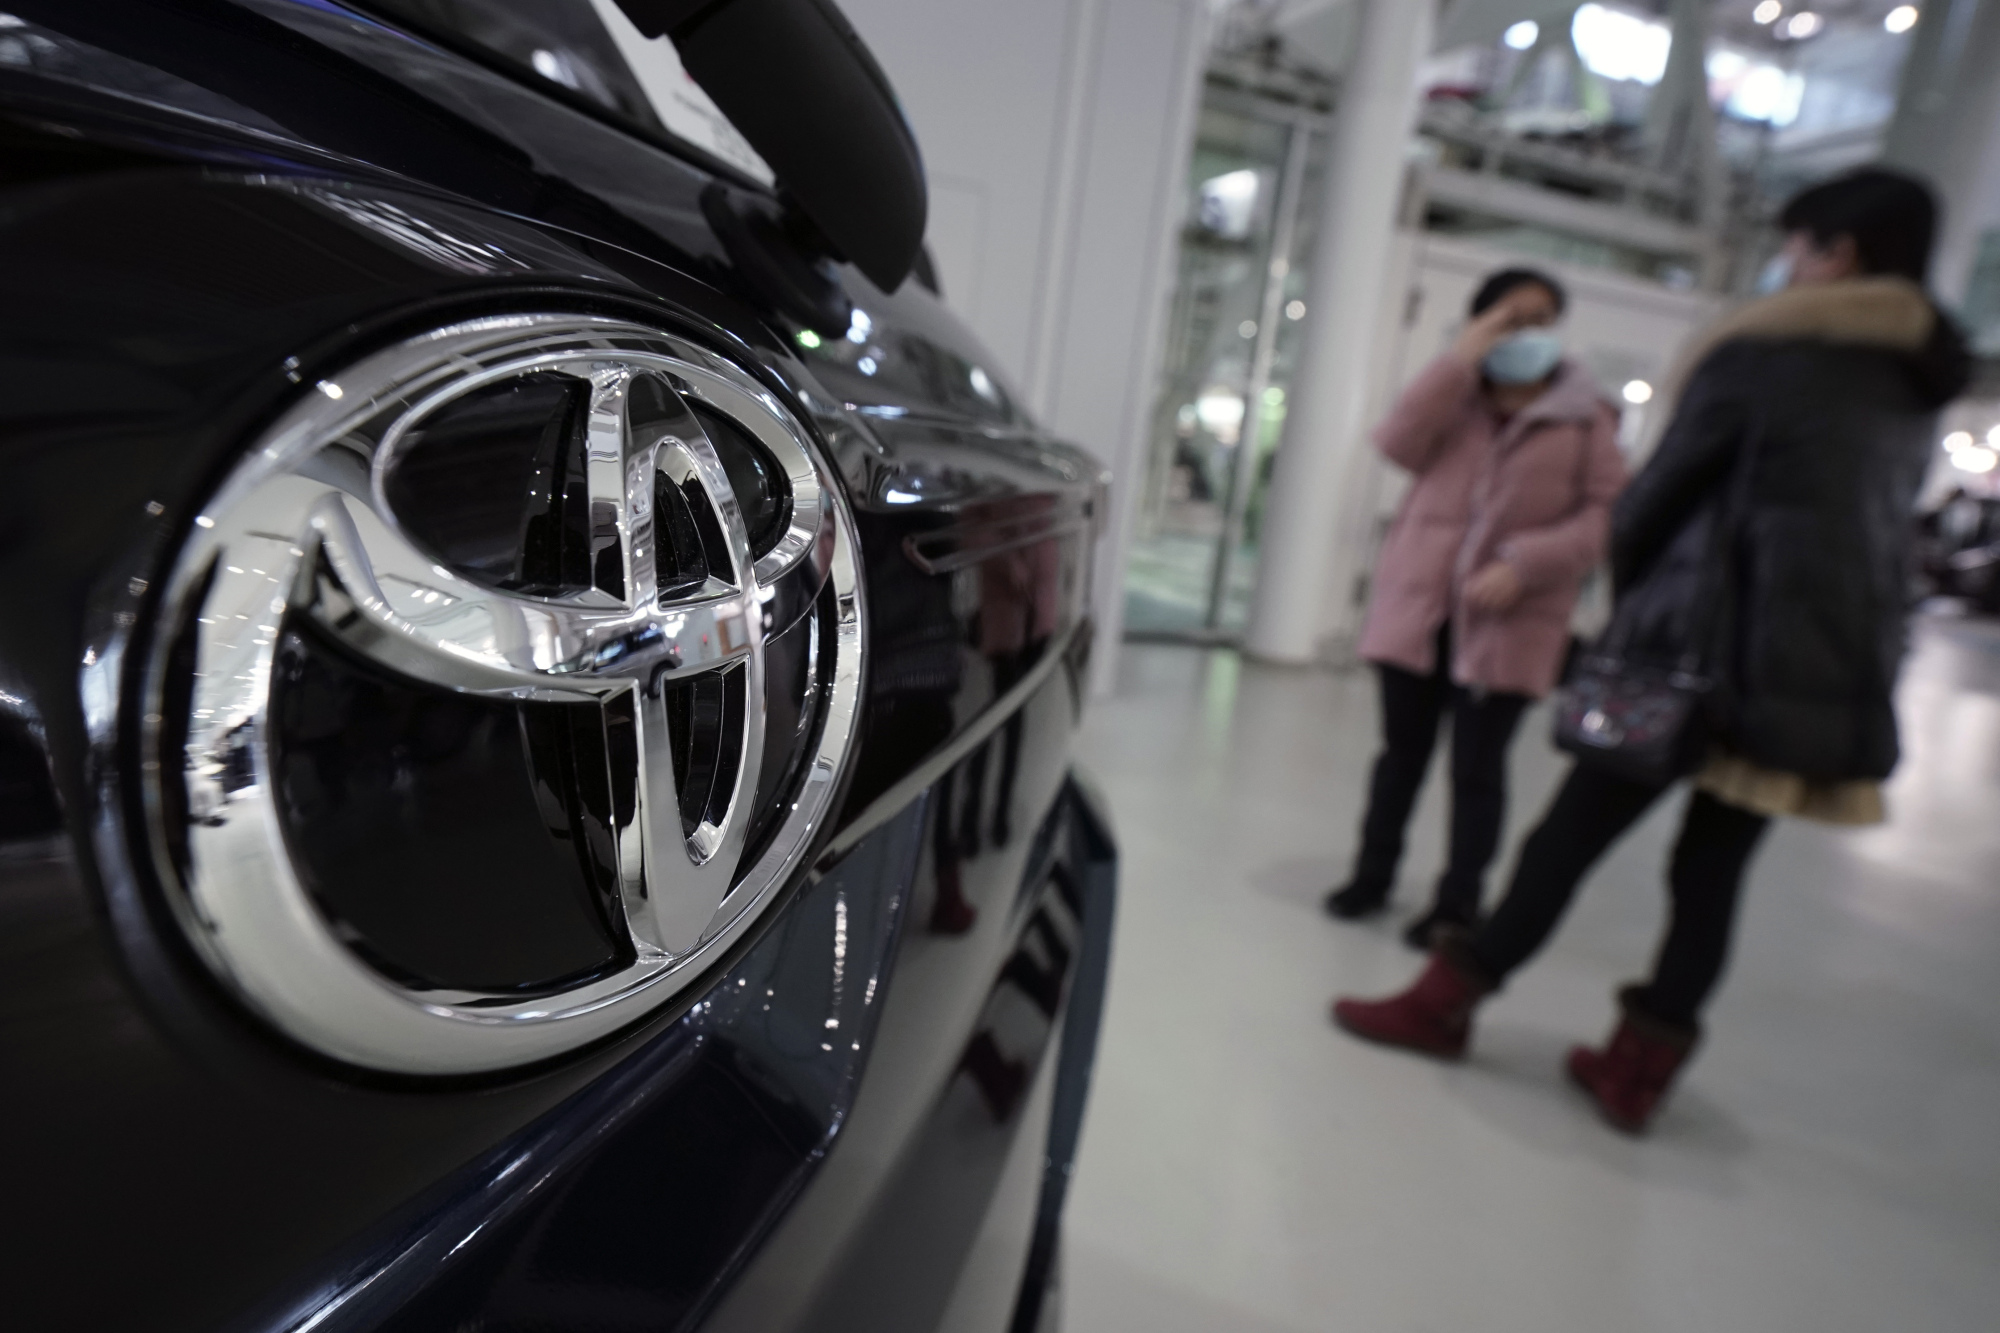 Visitors stand by a Toyota Motor Corp. car at a showroom on Thursday in Tokyo. German automaker Volkswagen AG has kept its lead as the world's largest automaker, selling more vehicles than Toyota last year. | AP